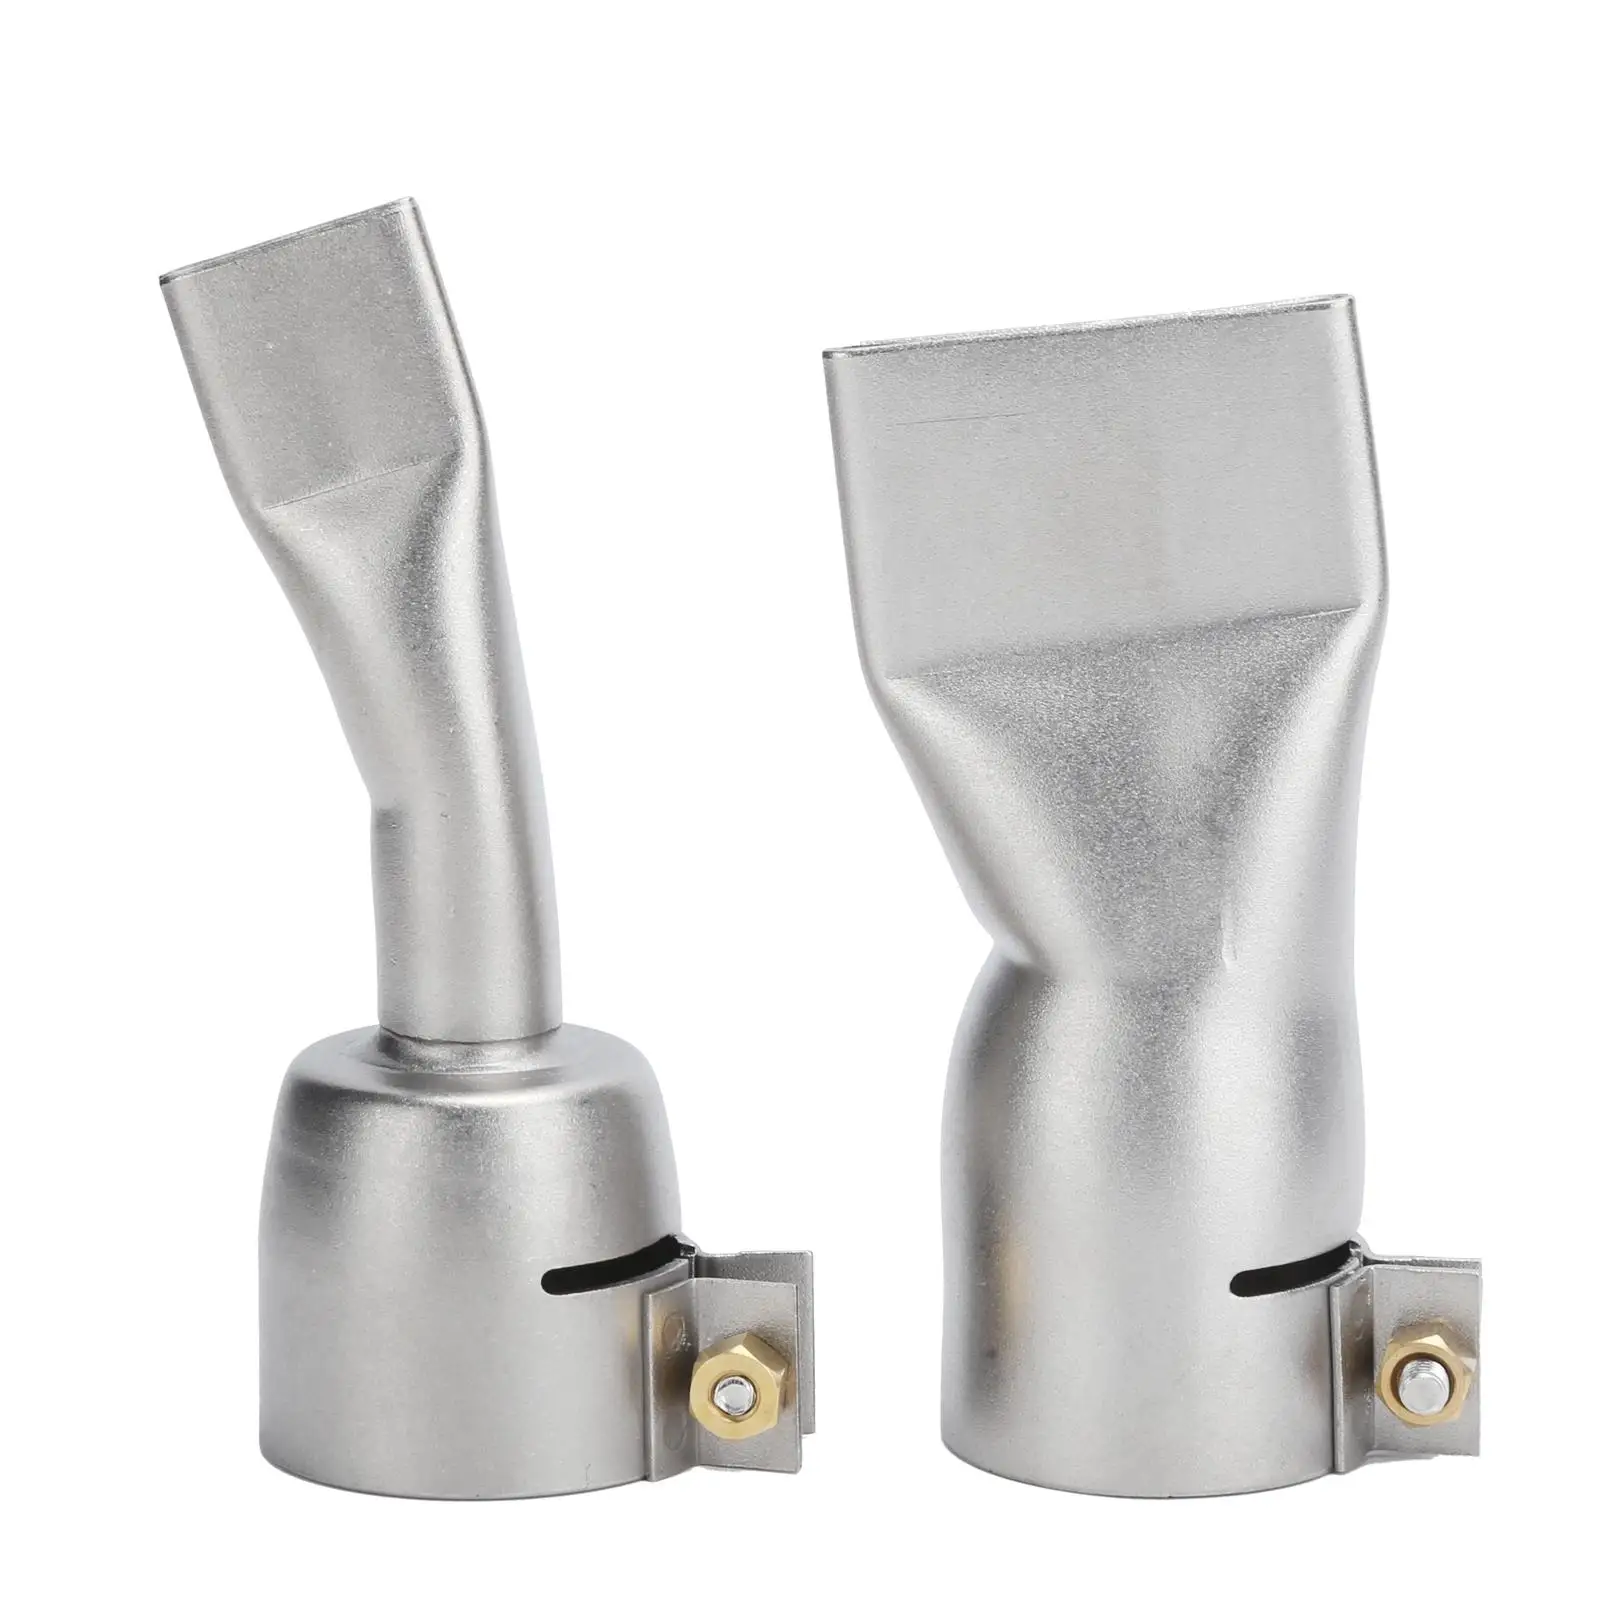 

2Pcs Stainless Steel Welding Flat Nozzles 20mm Small & 40mm Large Tip for welder Tool